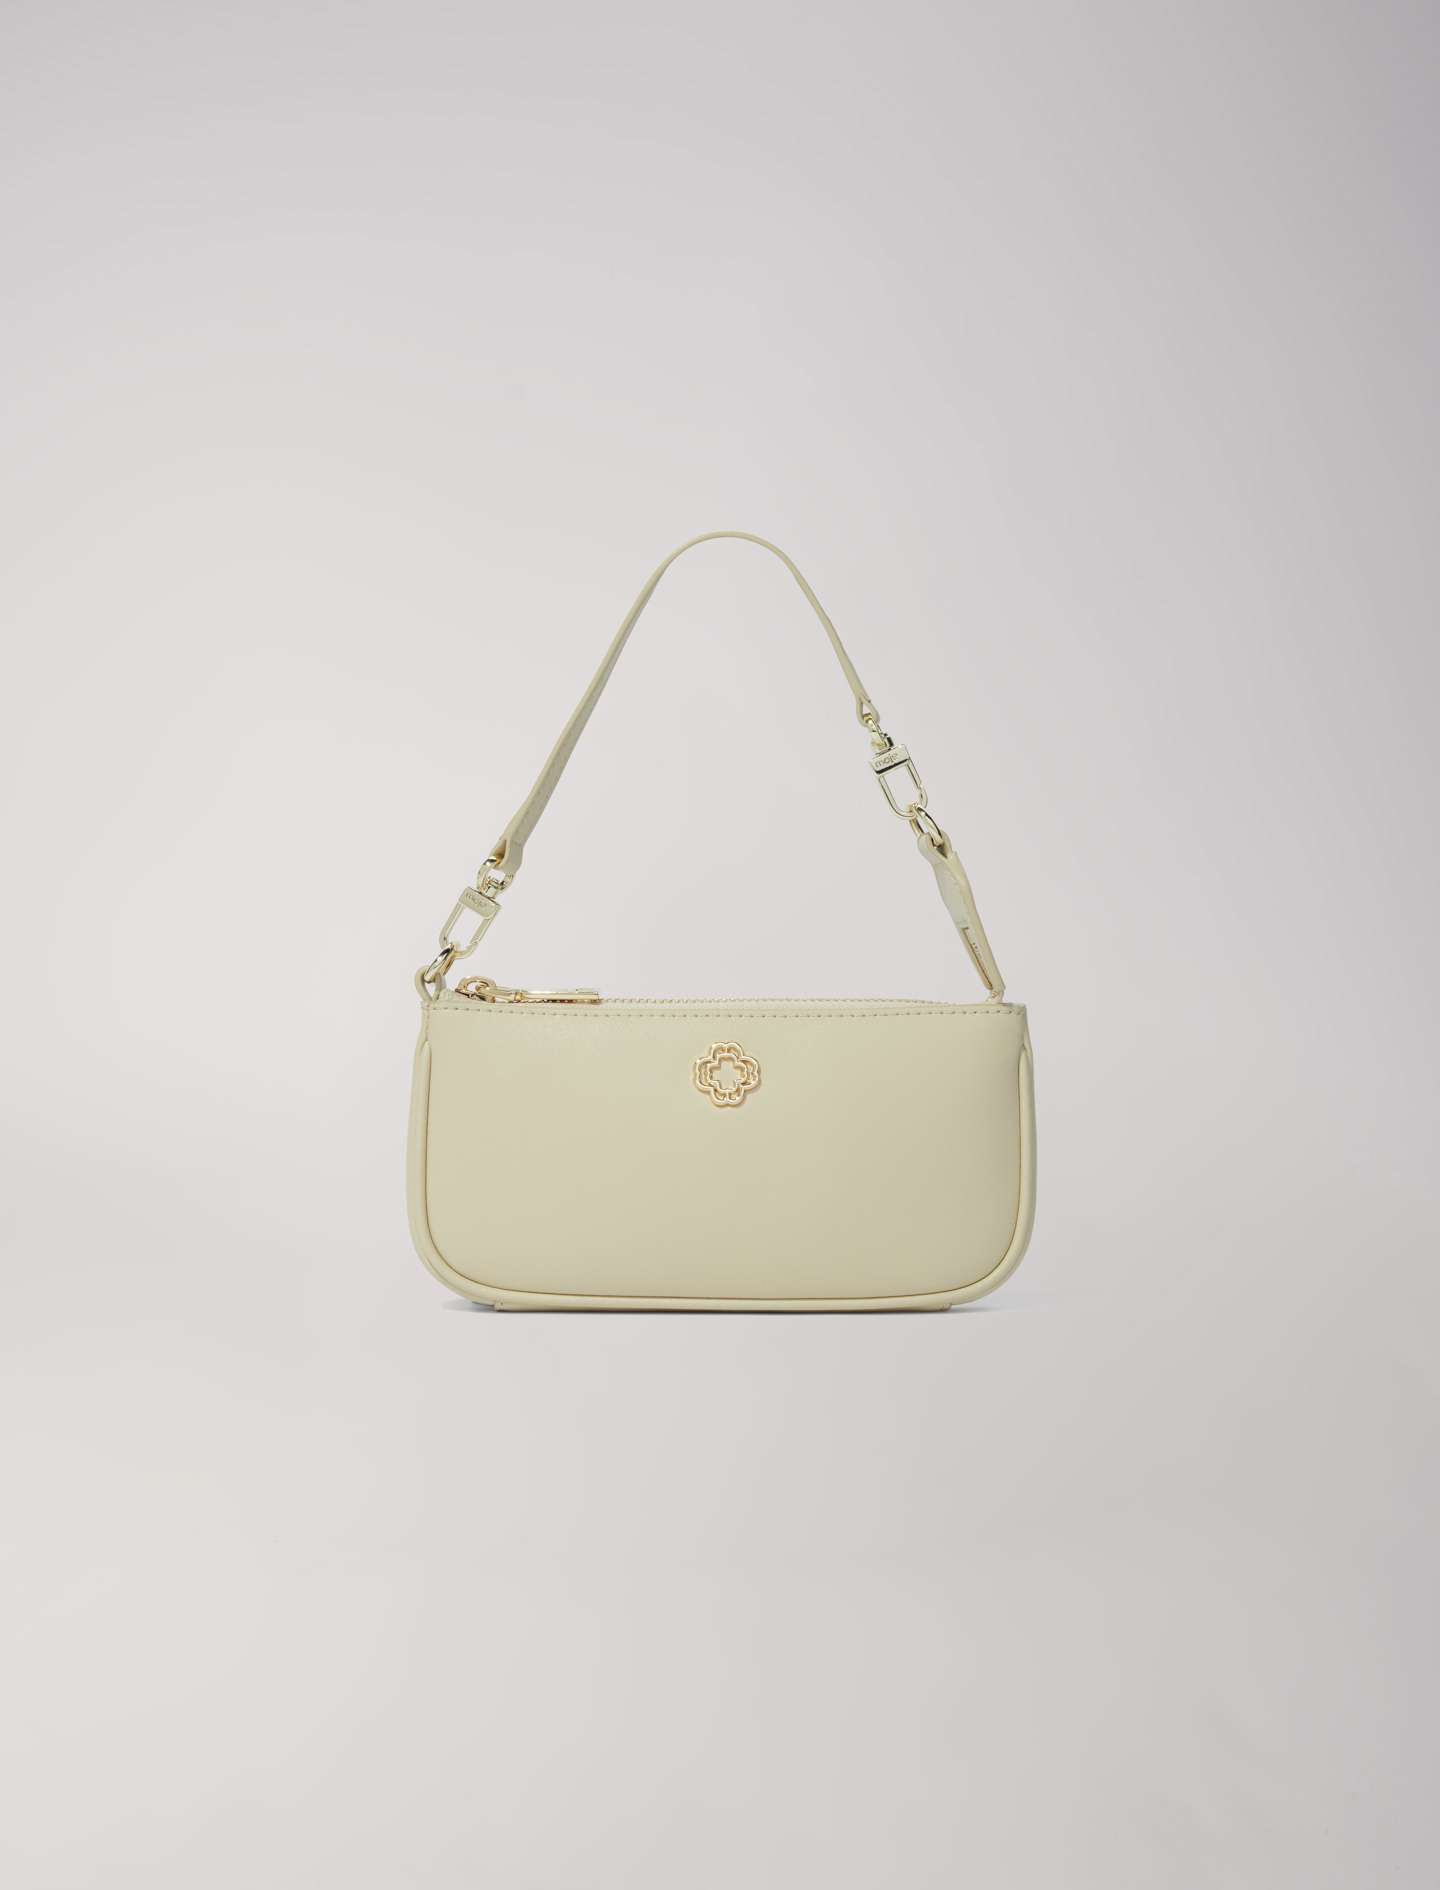 Maje Woman's polyester Eyelet: Small leather clutch bag for Spring/Summer, in color Ecru / Beige